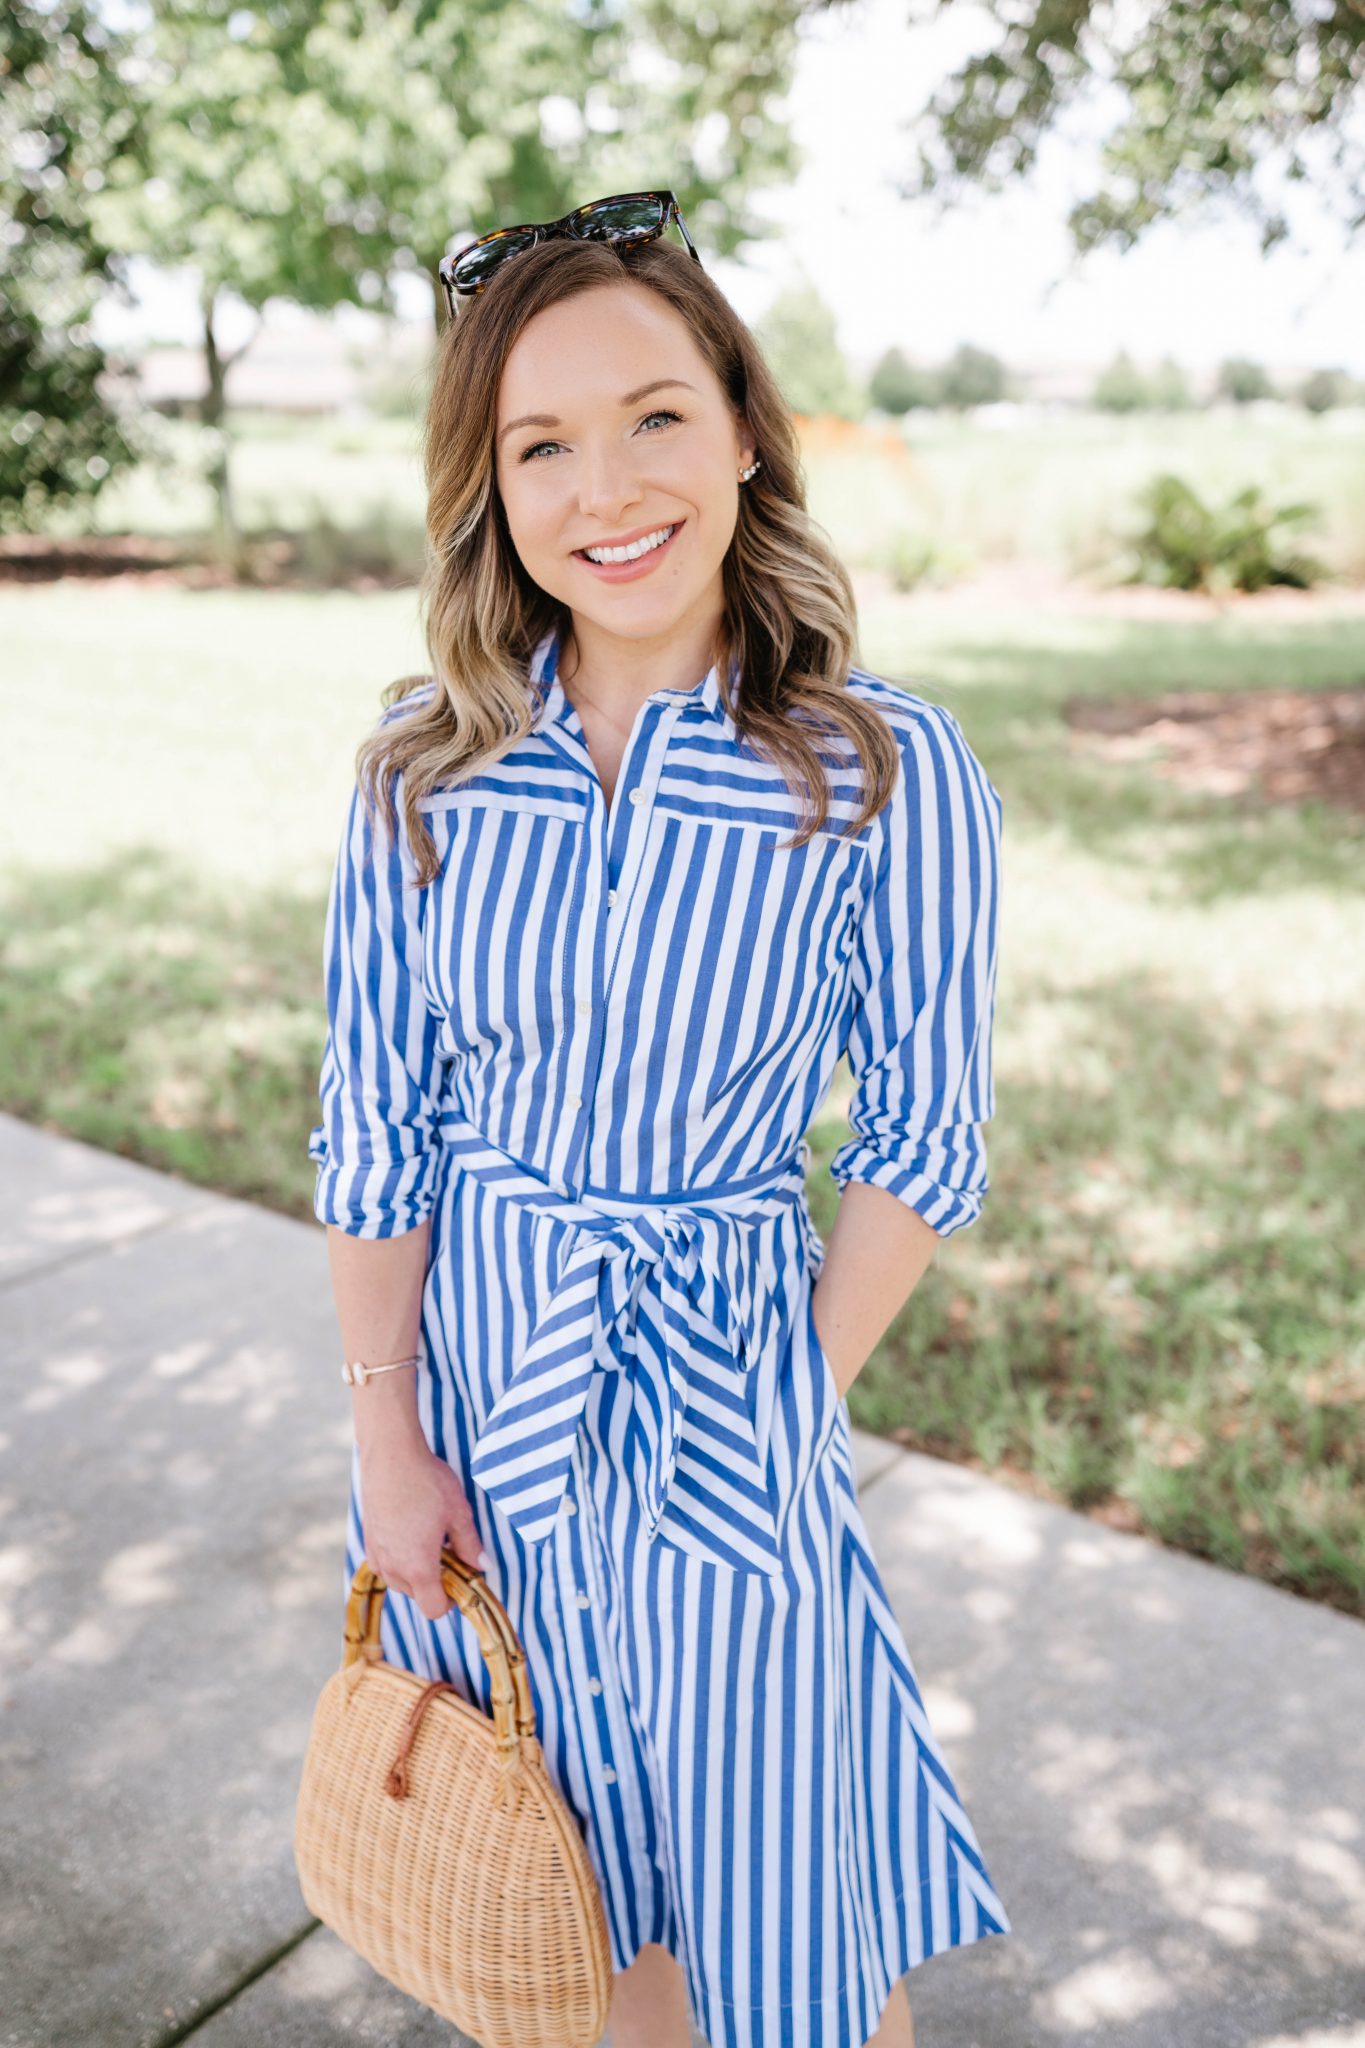 6 Summer Dresses You Need In Your Closet - Shannon H. Sullivan